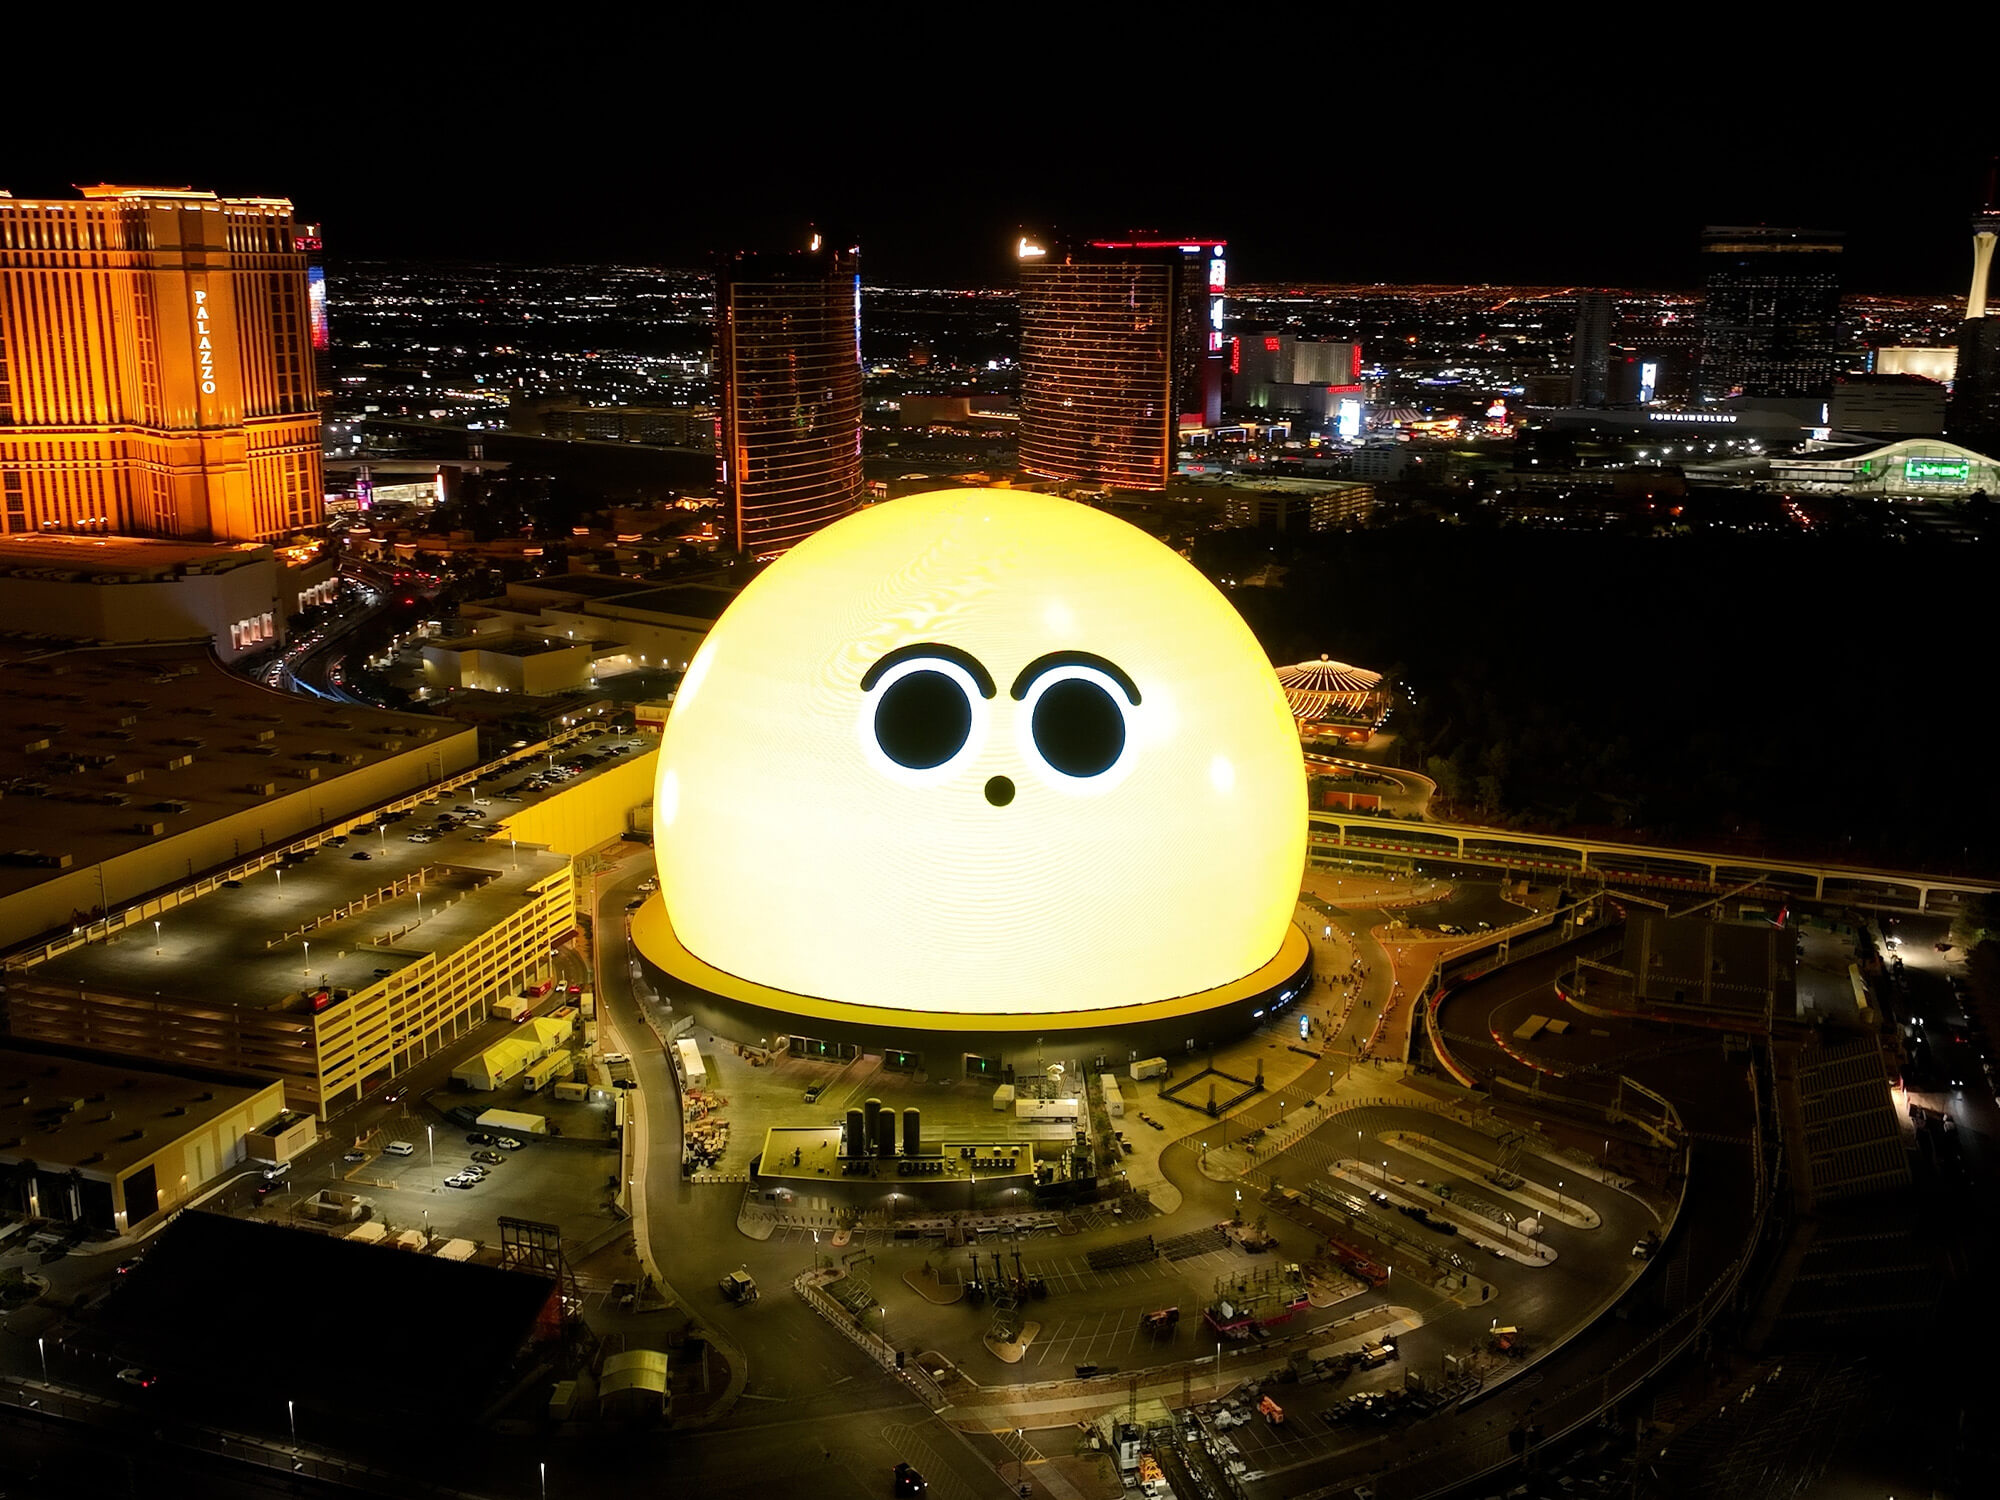 The Sphere photographed from above. It is showing a yellow animated face on its surface. Its expression is surprised.